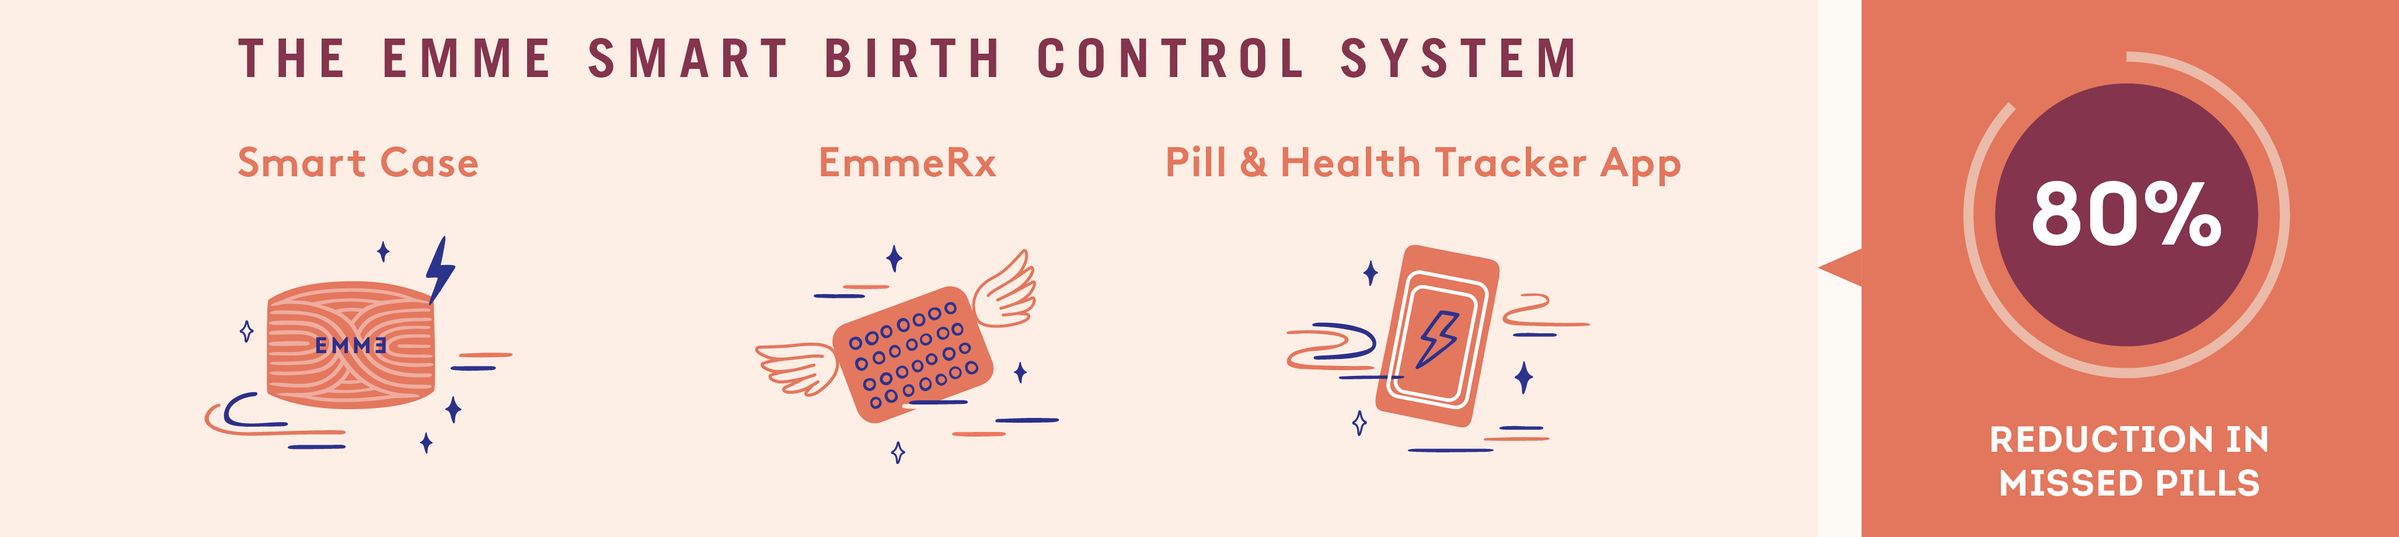 The Emme Complete Birth Control System